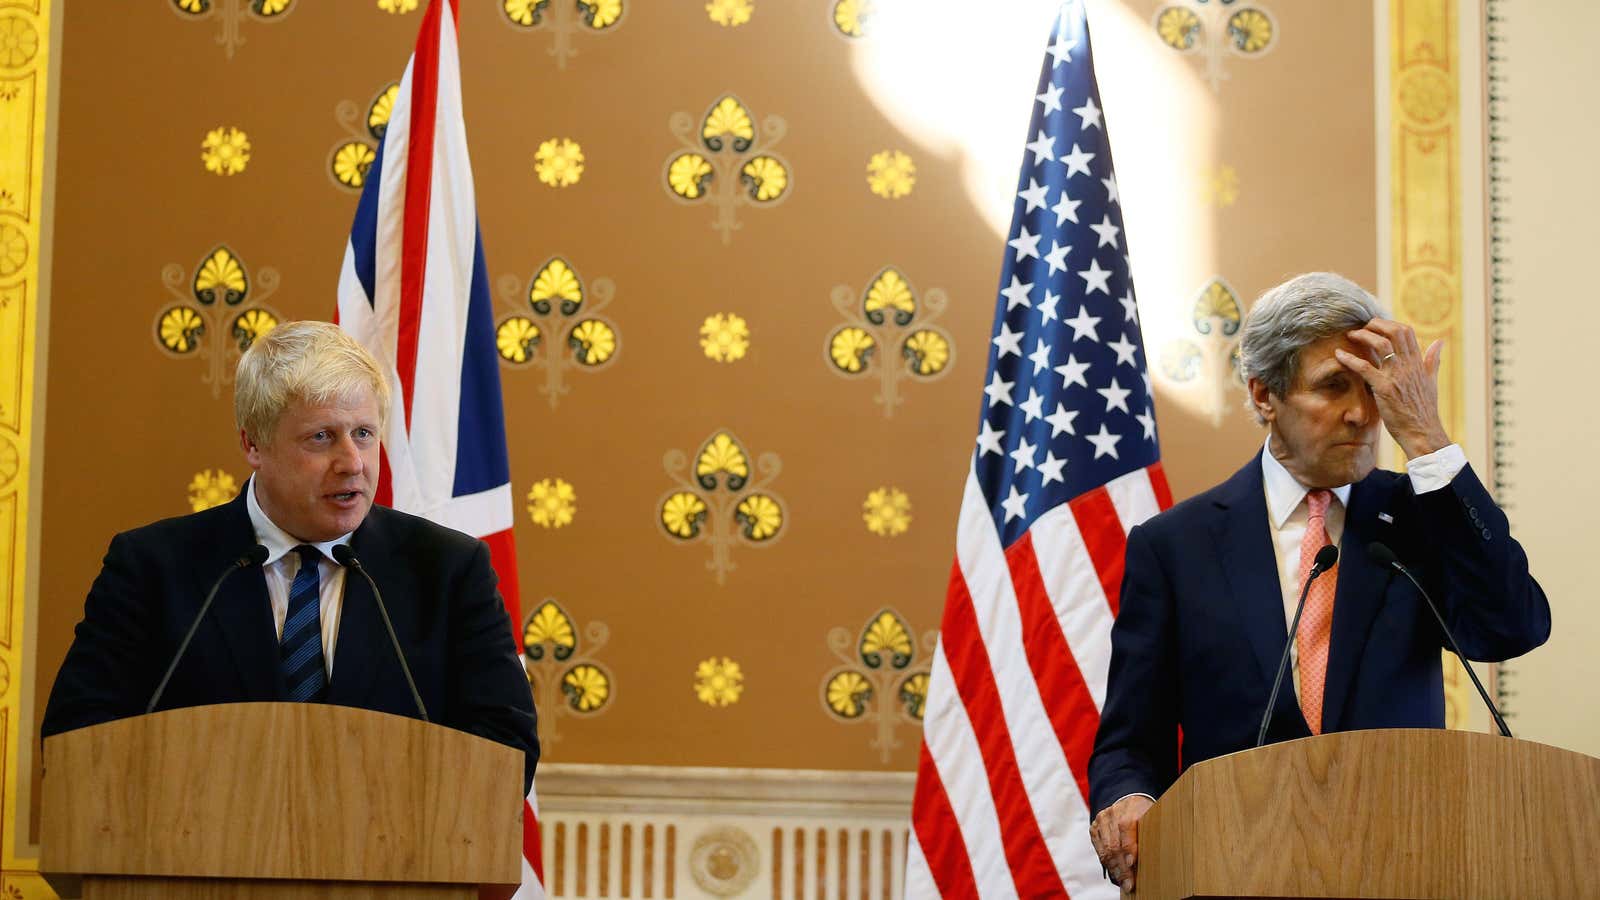 Britain’s Foreign Secretary Boris Johnson, left, speaks during a press conference with U.S. Secretary of State John Kerry at the Foreign Office in London.